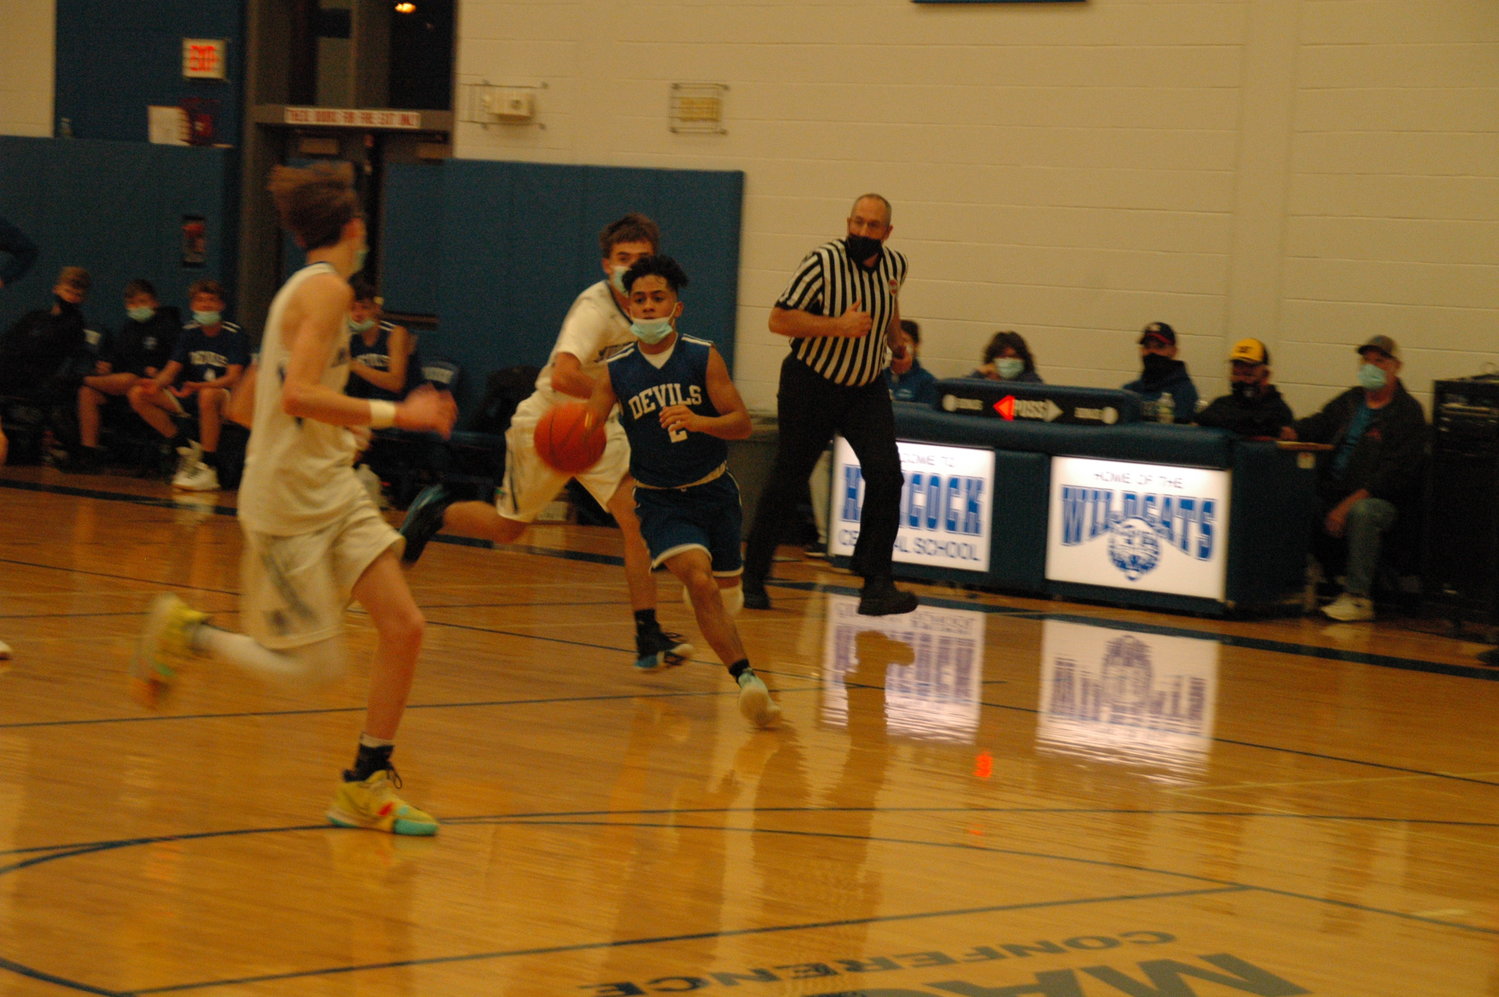 Alaniz Ruiz drives through the lane on a fast break. Ruiz tallied 30 points in two games over the weekend.